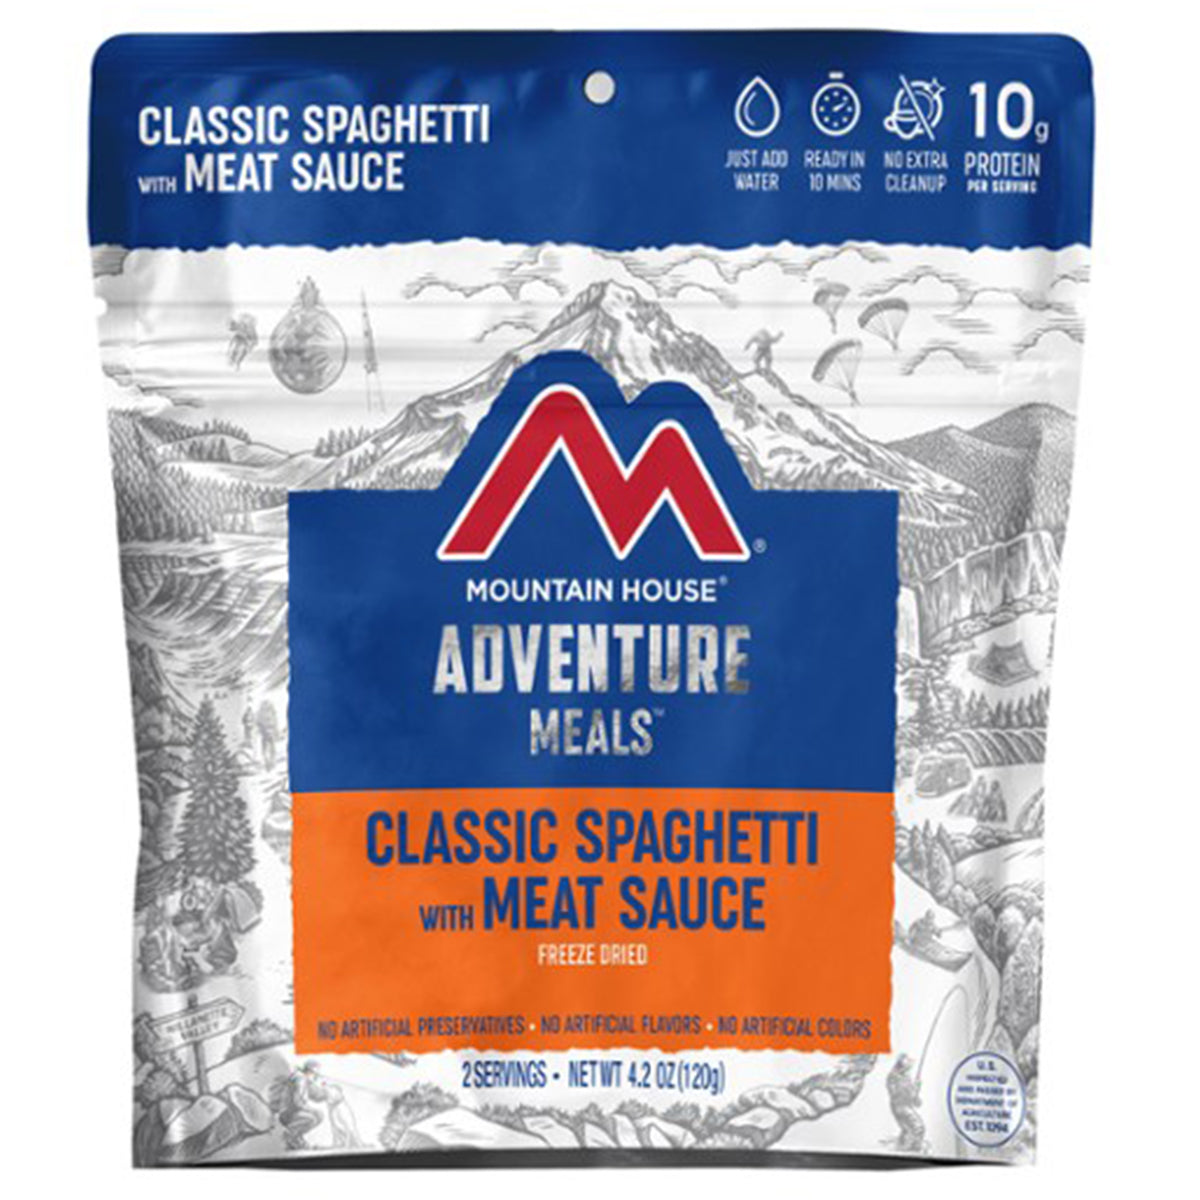 Mountain House Classic Spaghetti with Meat Sauce in Mountain House Classic Spaghetti with Meat Sauce - goHUNT Shop by GOHUNT | Mountain House - GOHUNT Shop